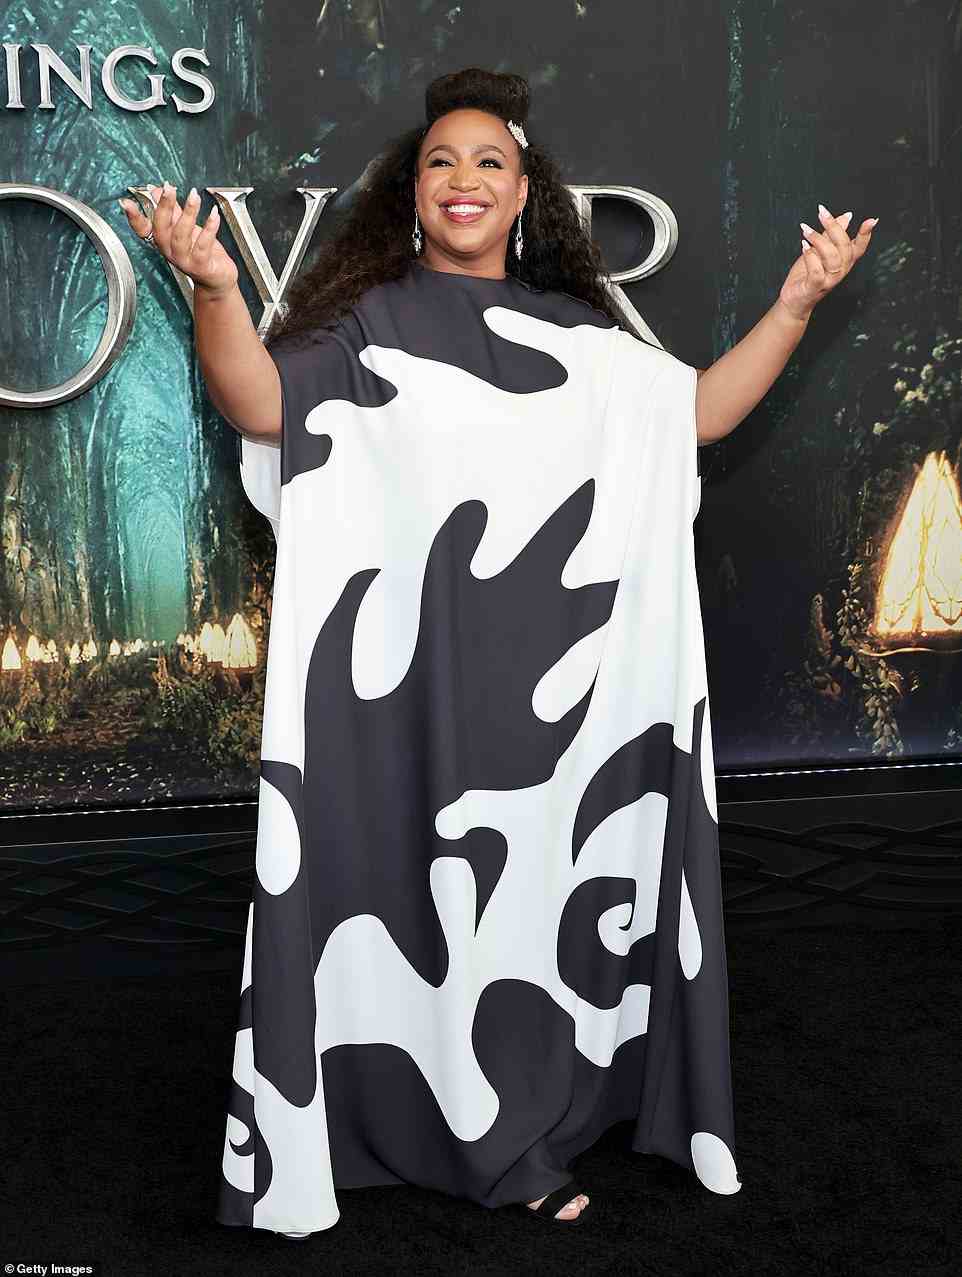 Hitting the red carpet: Sophia Nomvete - who plays Dwarven Princess Disa in the new show - looked stylish wearing a black and white-patterned kaftan and black heels at the event